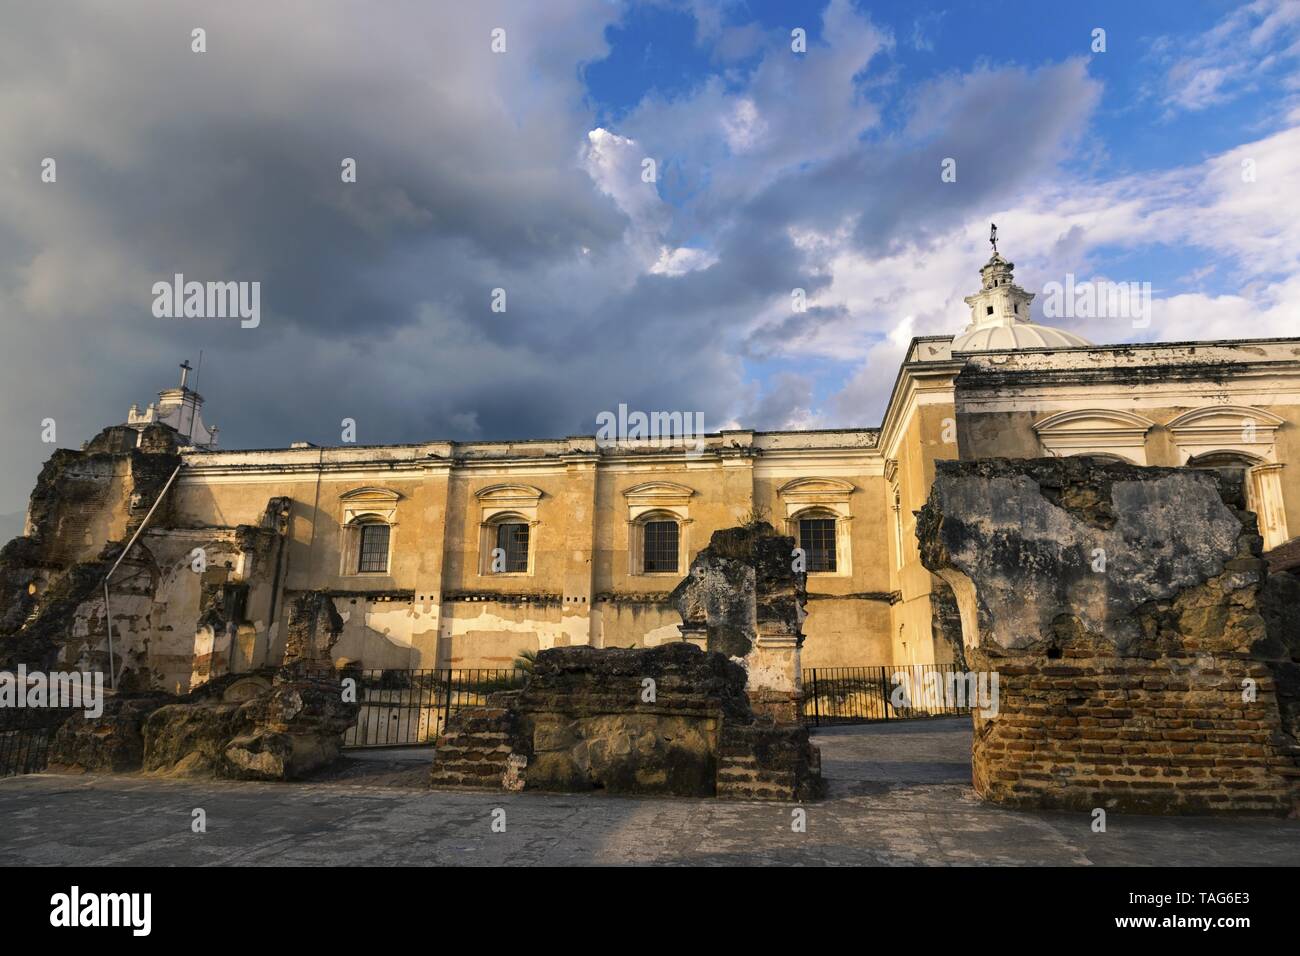 Santo Domingo Monastery Ruins, Spanish Colonial Architecture Damaged By Historic Earthquaqe in Old Town Antigua Guatemala, UNESCO World Heritage Site Stock Photo